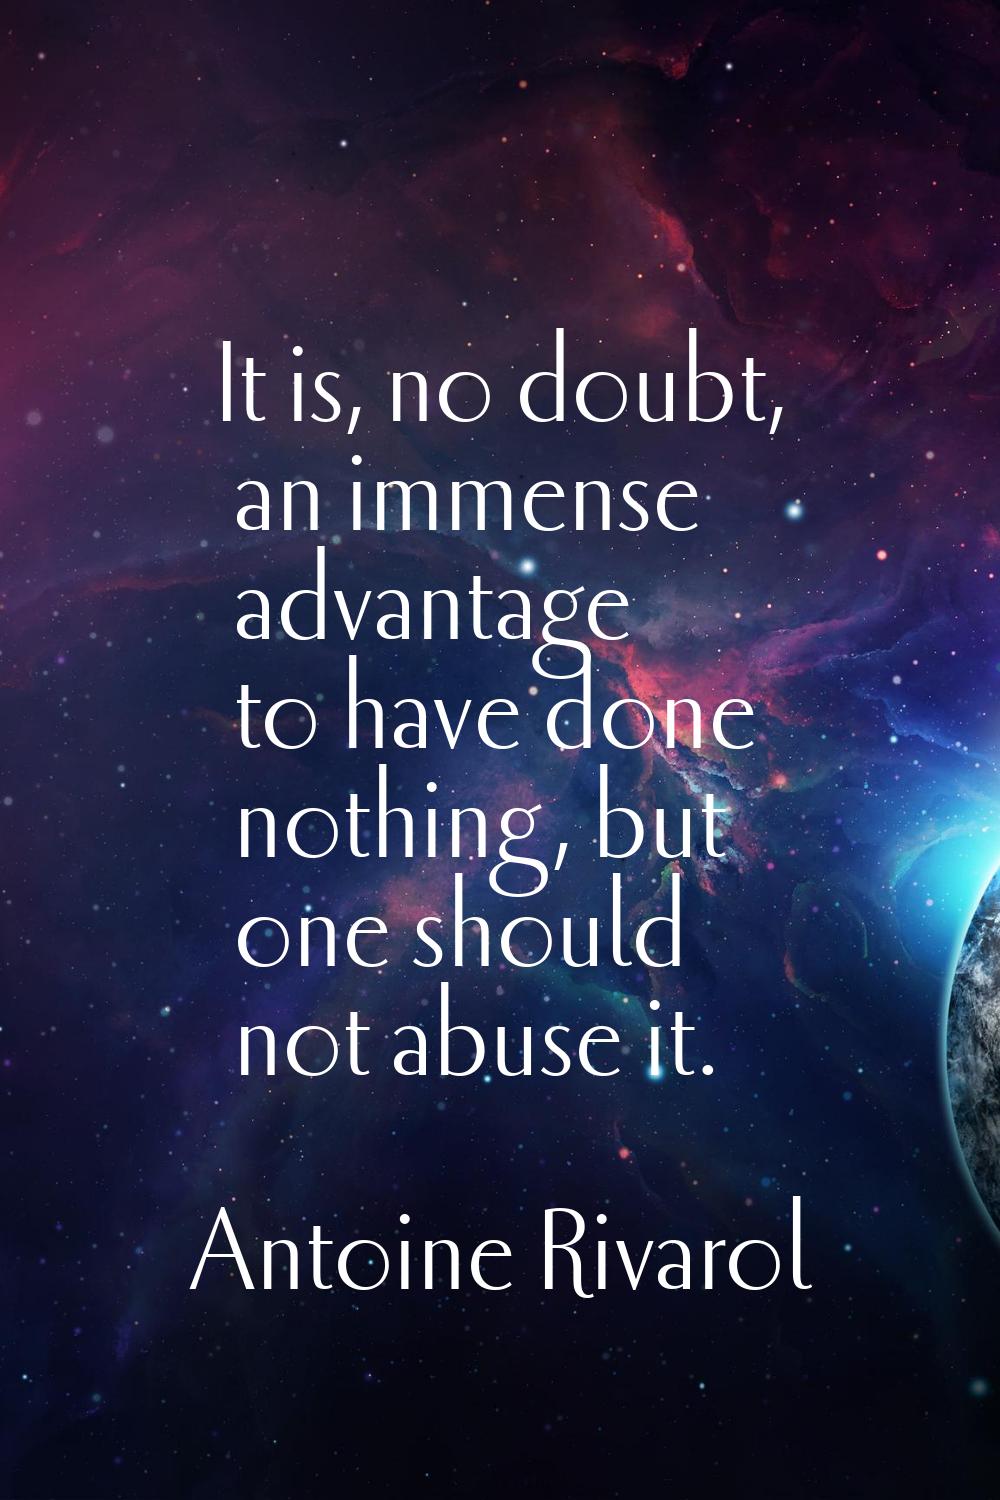 It is, no doubt, an immense advantage to have done nothing, but one should not abuse it.